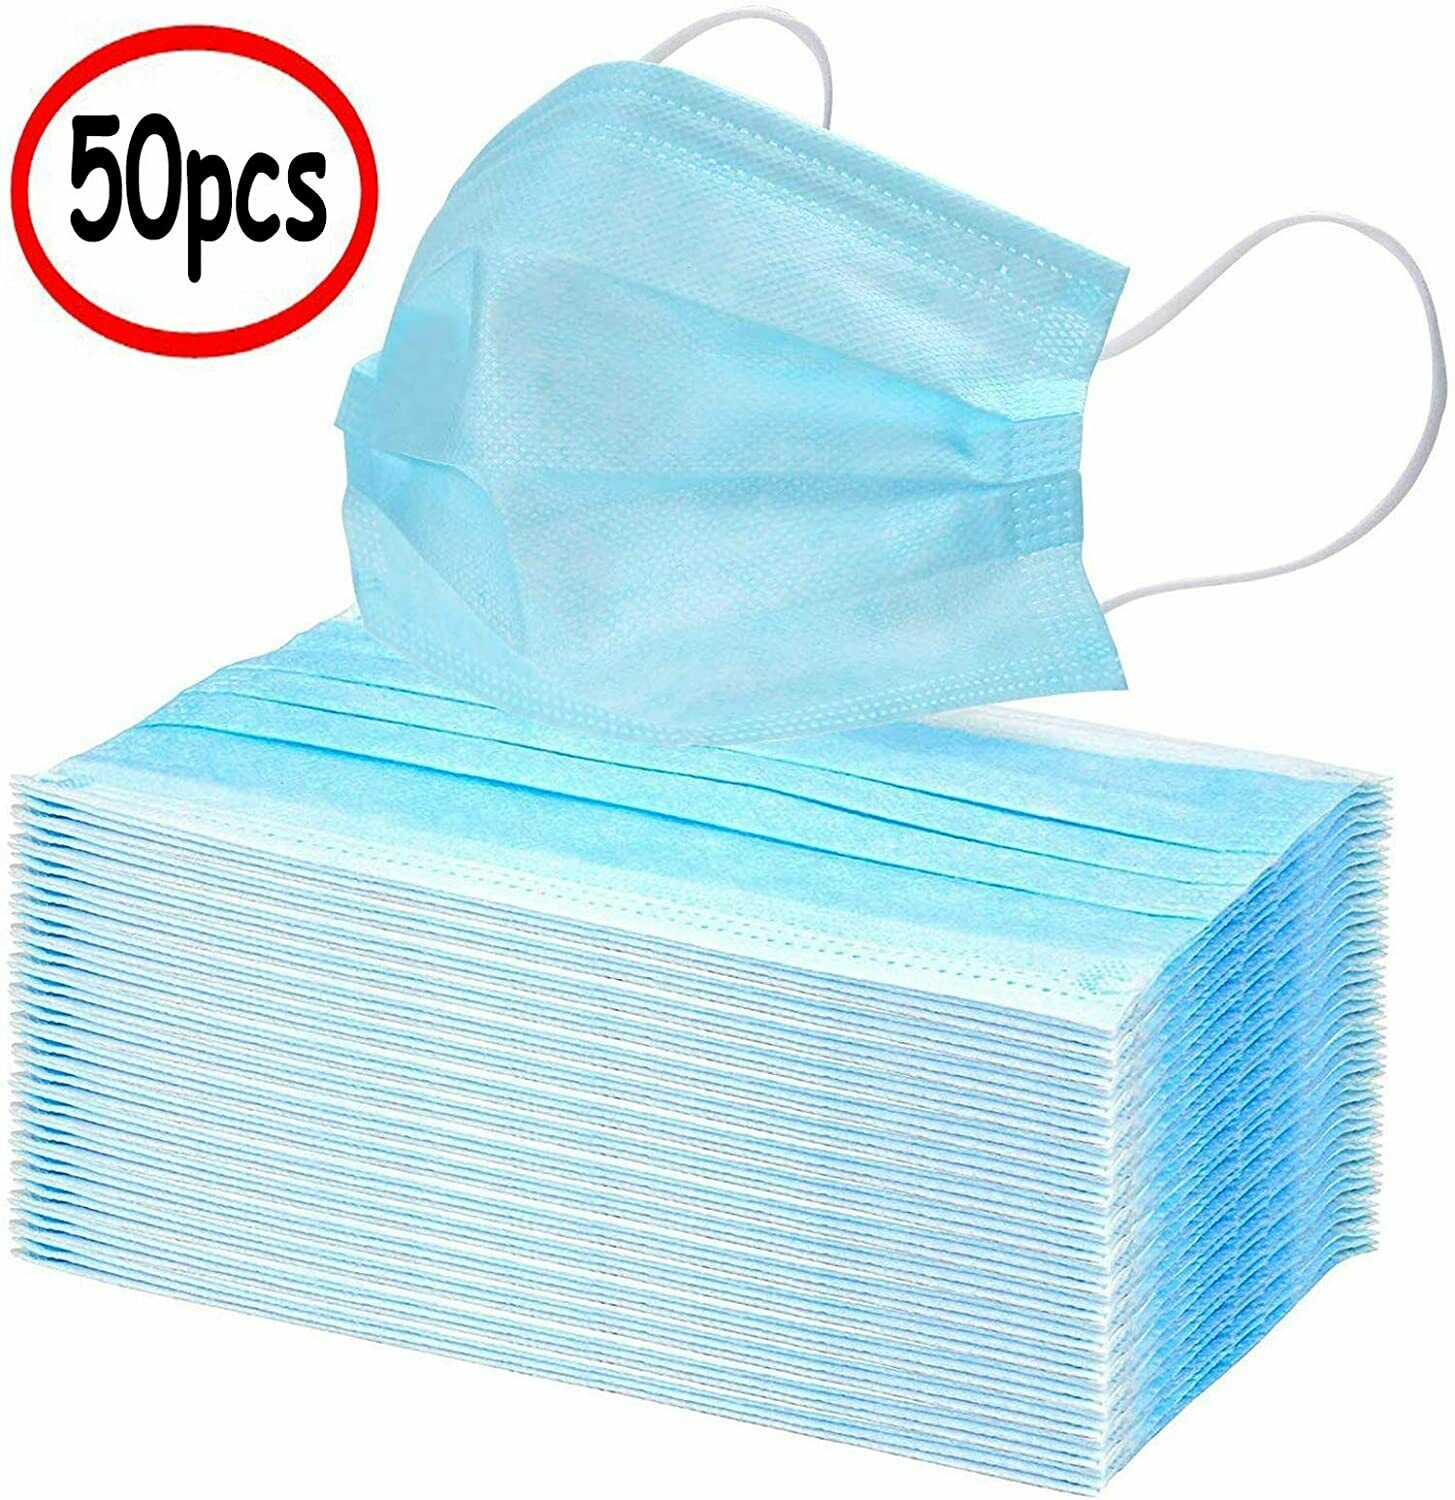 Face Mask Mouth & Nose Protector Respirator Masks With Filter Lot 50 Pcs